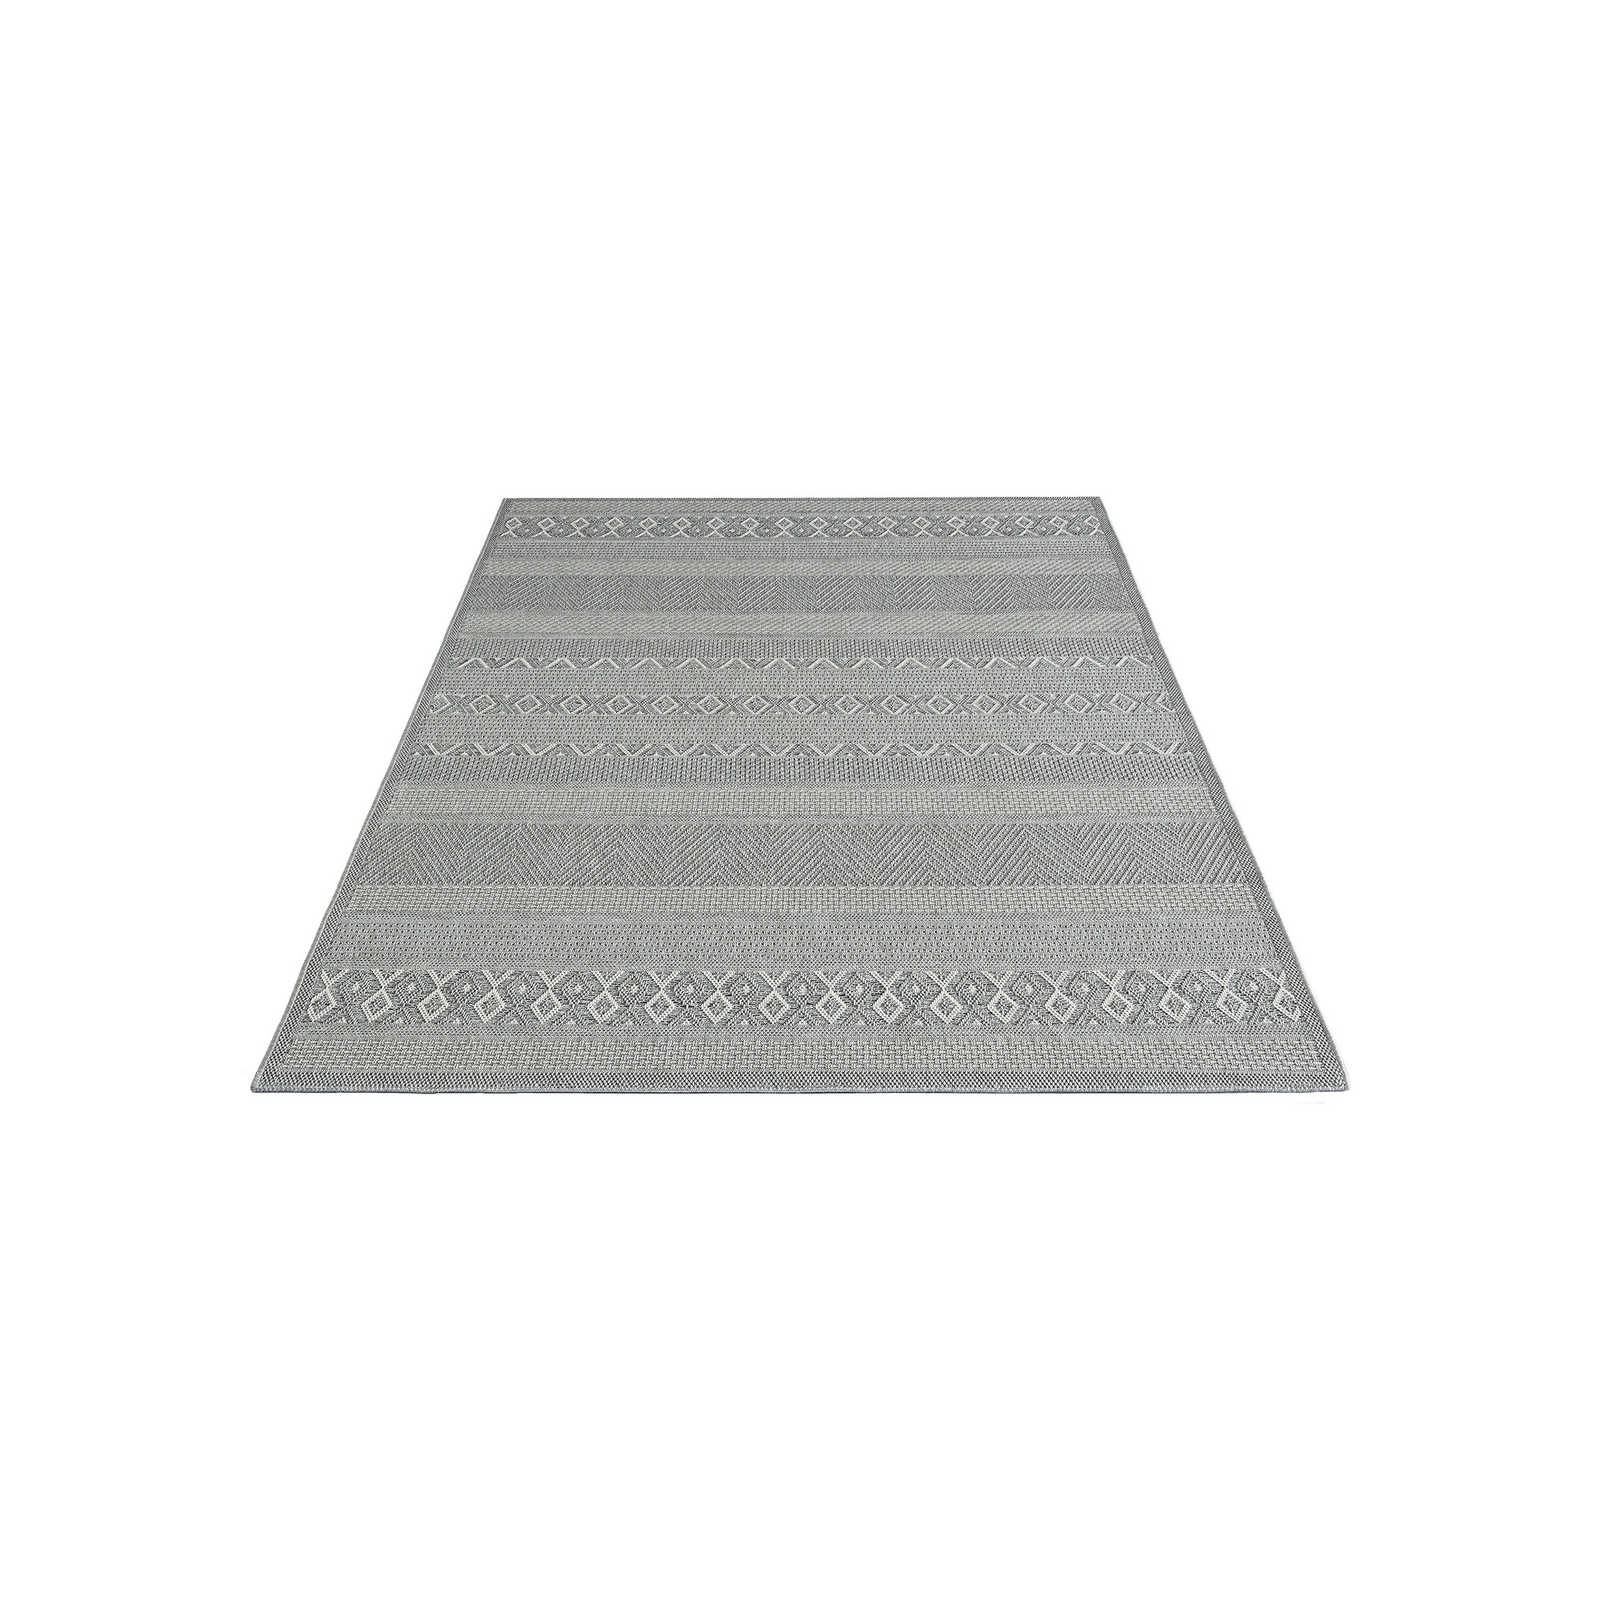 Simple Patterned Outdoor Rug in Grey - 200 x 140 cm
